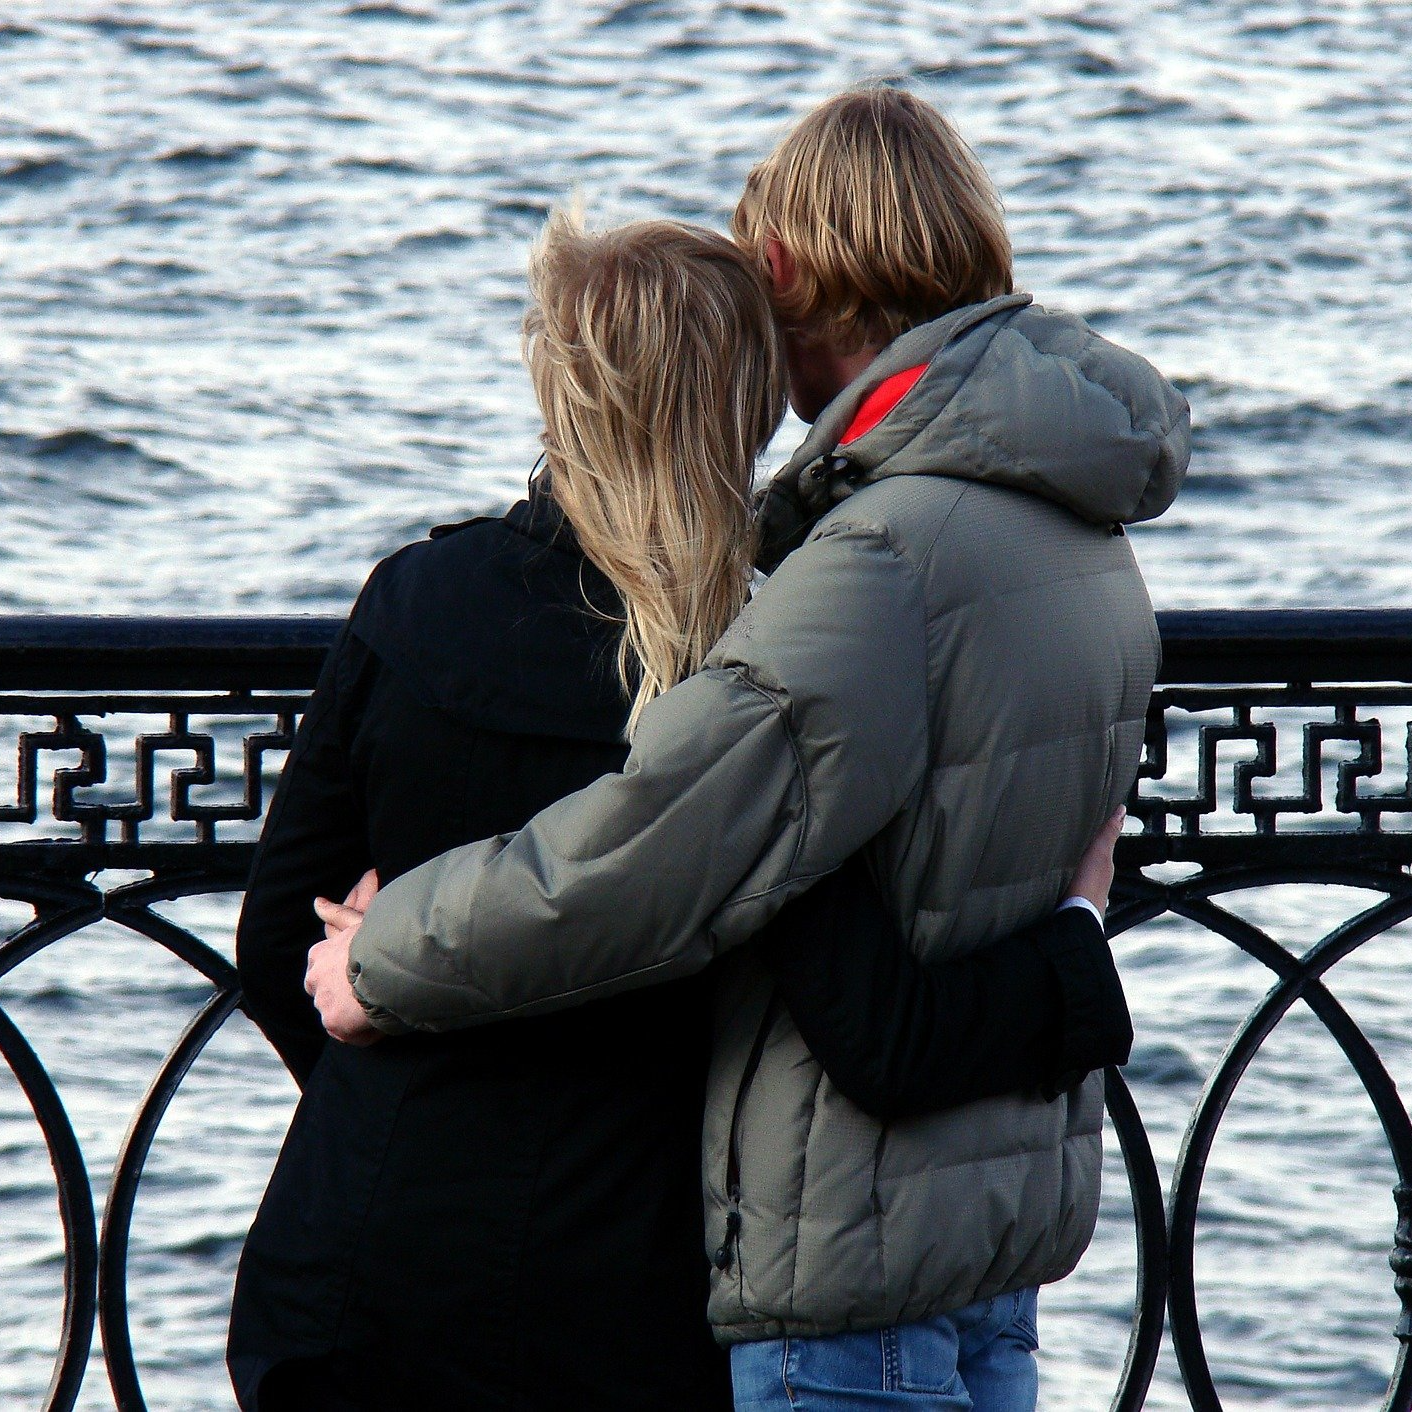 a couple standing together looking at a body of water.